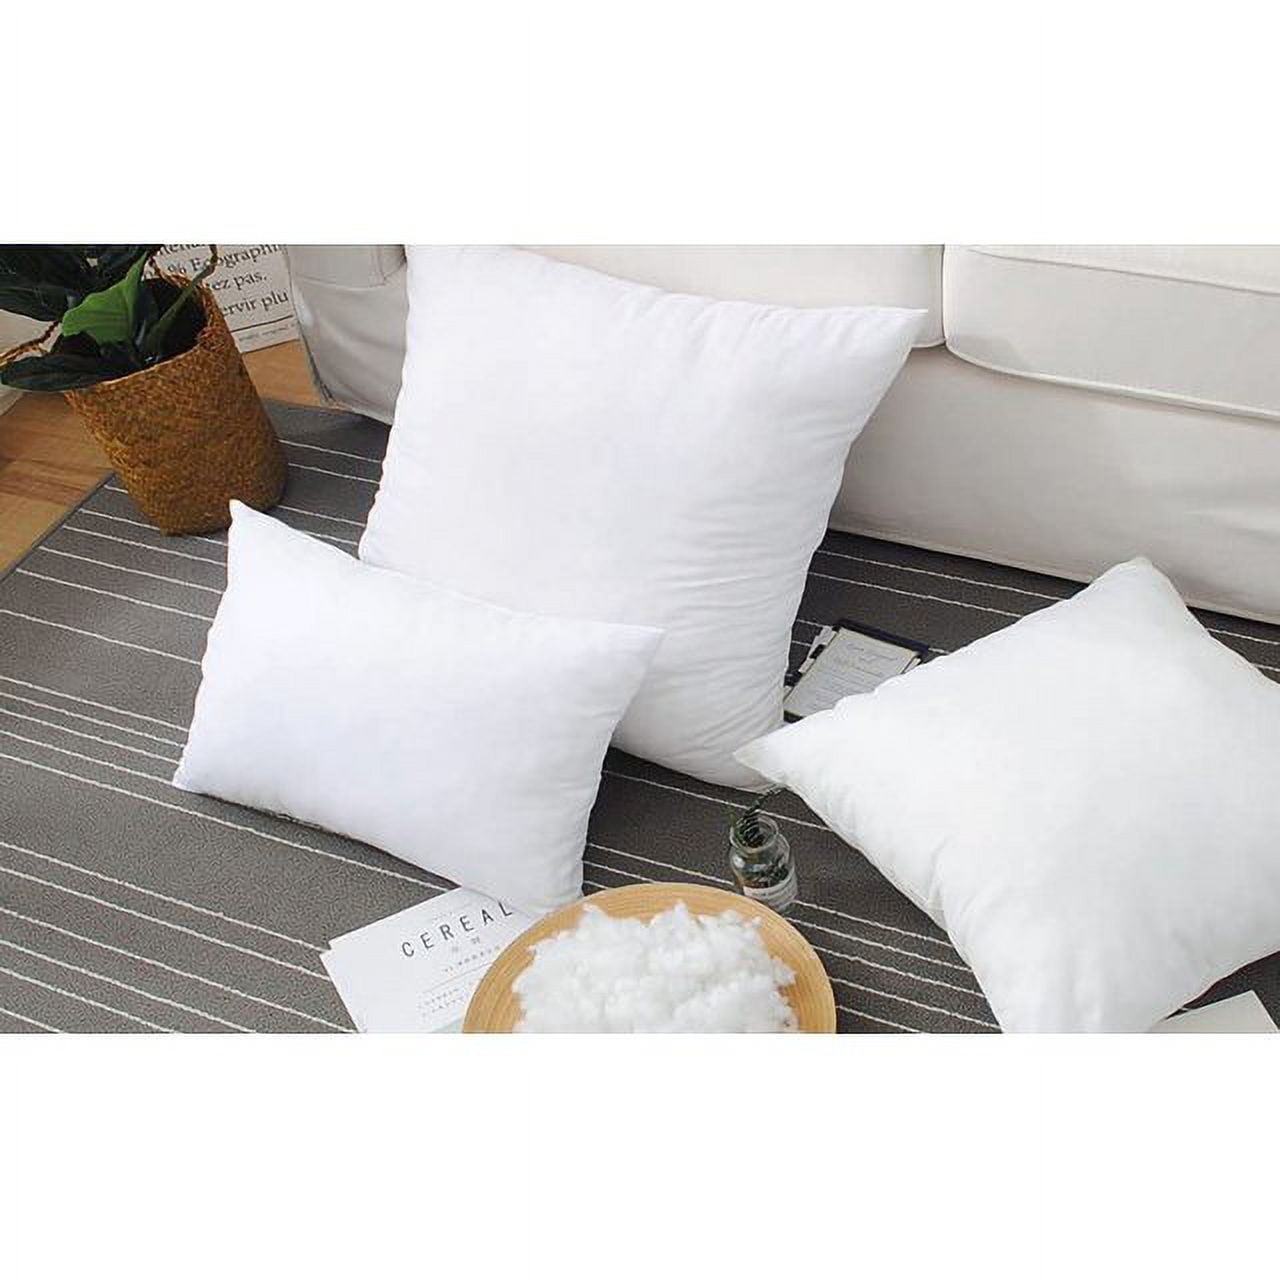 A&B Home T41429 Polyester 18 X 4 inch White Pillow Insert